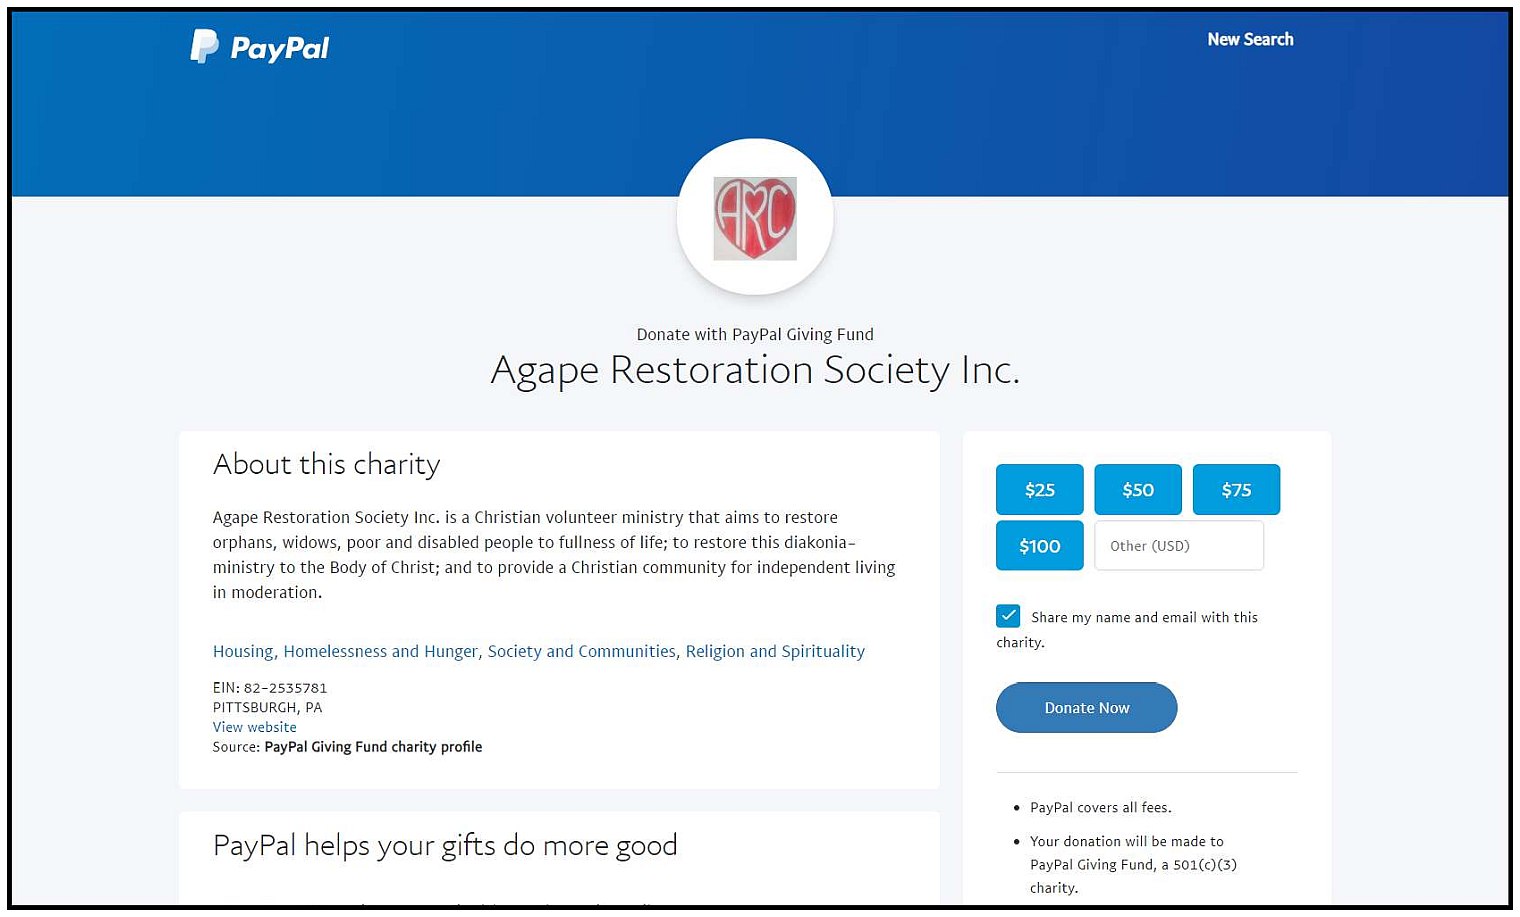 ARS PayPal Giving Fund